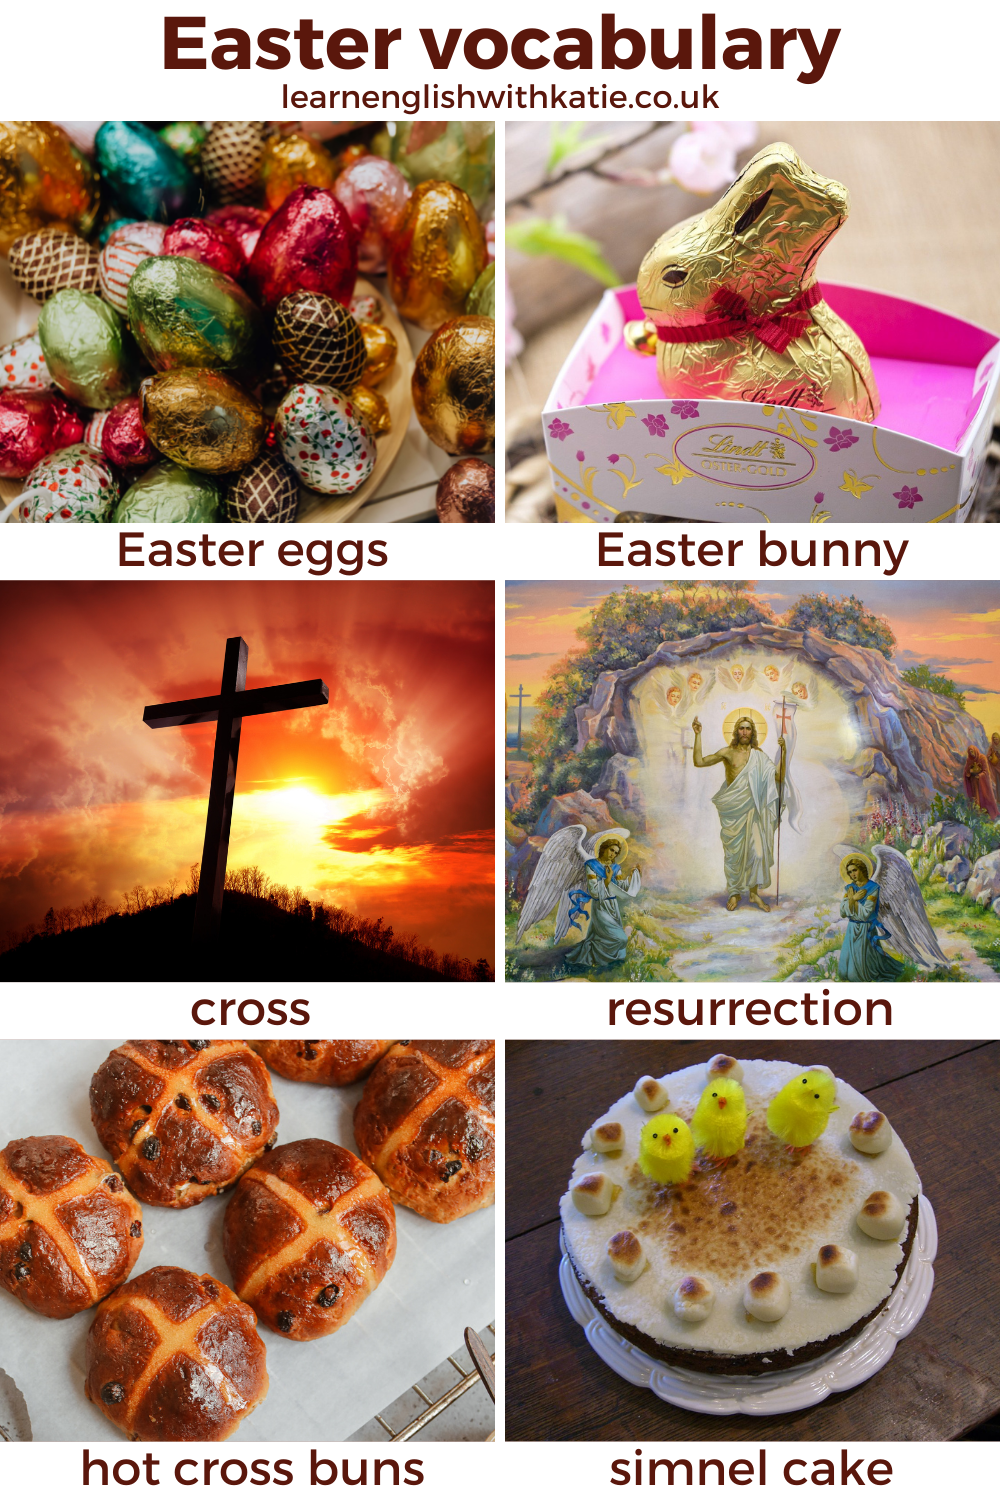 Pictures of Easter eggs, the Easter bunny, a cross, the resurrection, hot cross buns and simnel cake